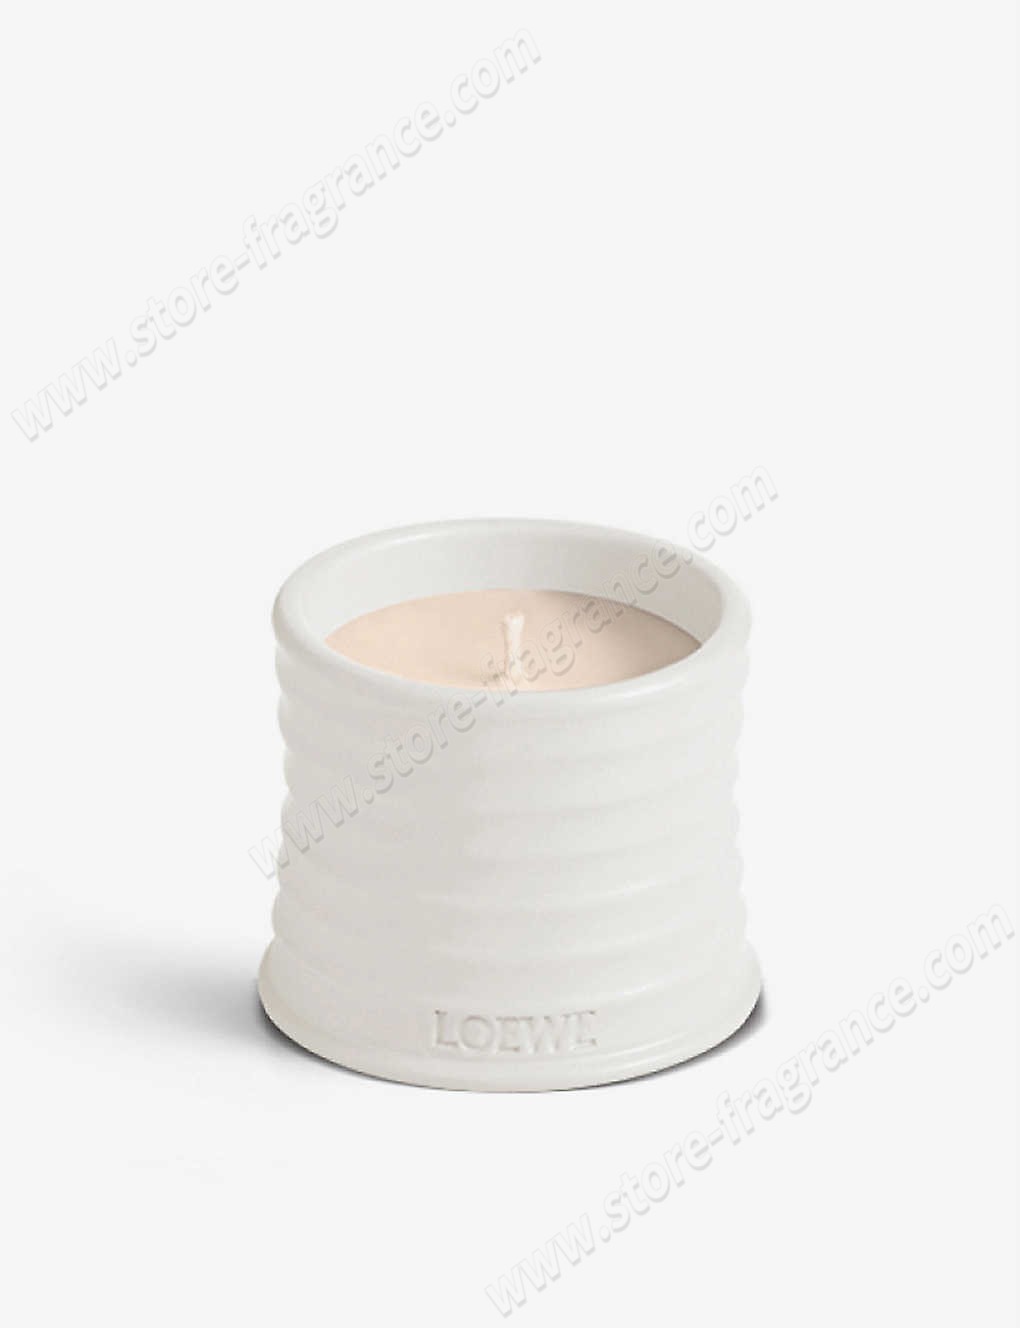 LOEWE/Oregano scented candle 170g ✿ Discount Store - LOEWE/Oregano scented candle 170g ✿ Discount Store